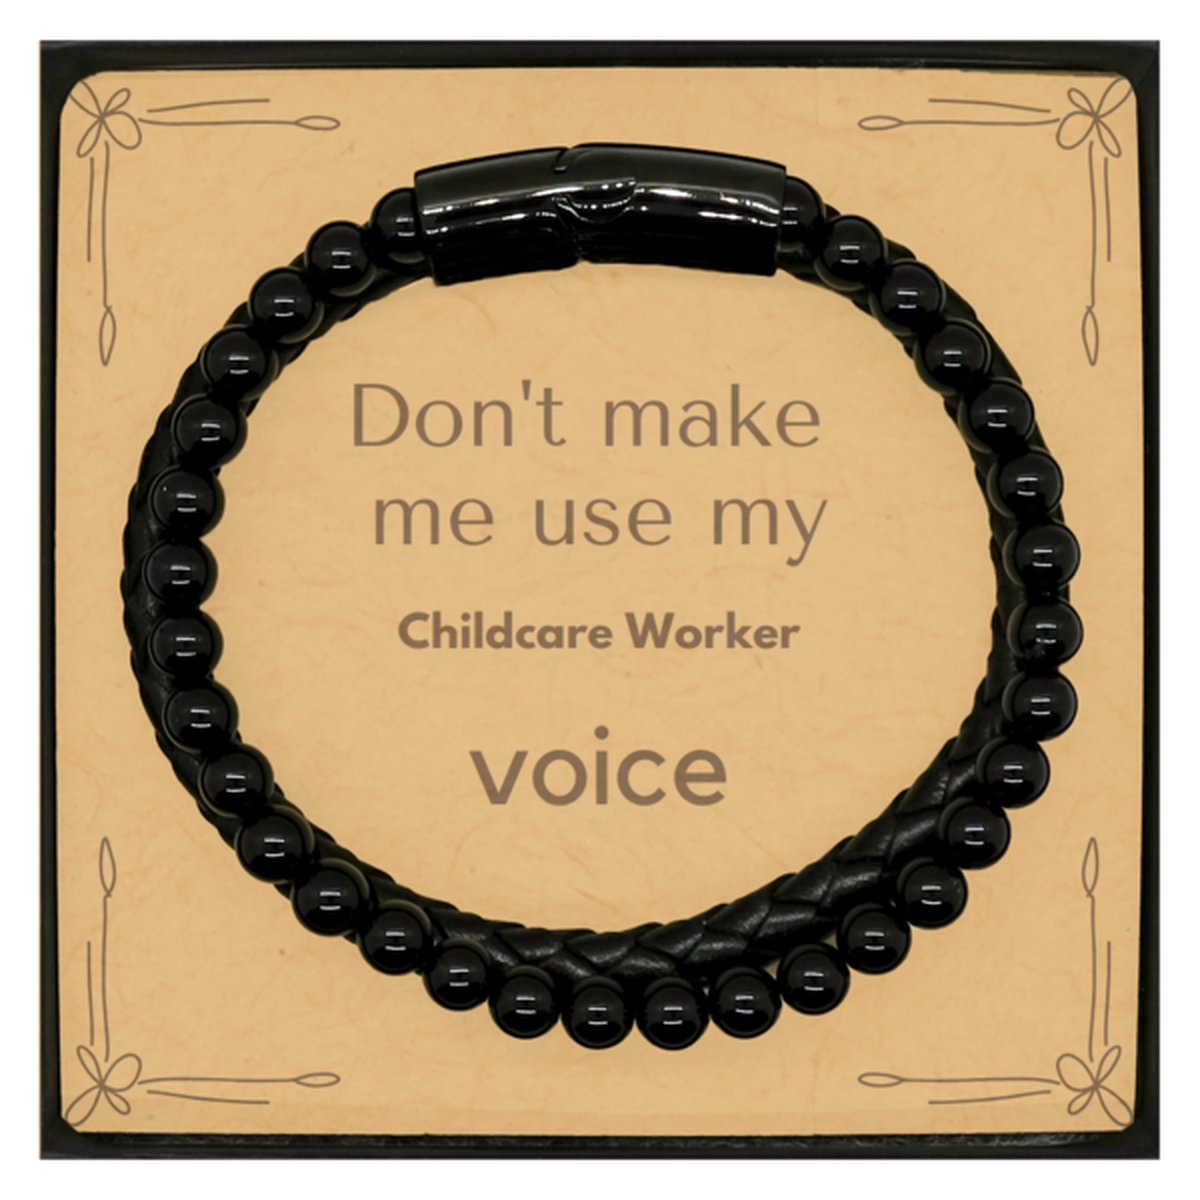 Don't make me use my Childcare Worker voice, Sarcasm Childcare Worker Card Gifts, Christmas Childcare Worker Stone Leather Bracelets Birthday Unique Gifts For Childcare Worker Coworkers, Men, Women, Colleague, Friends